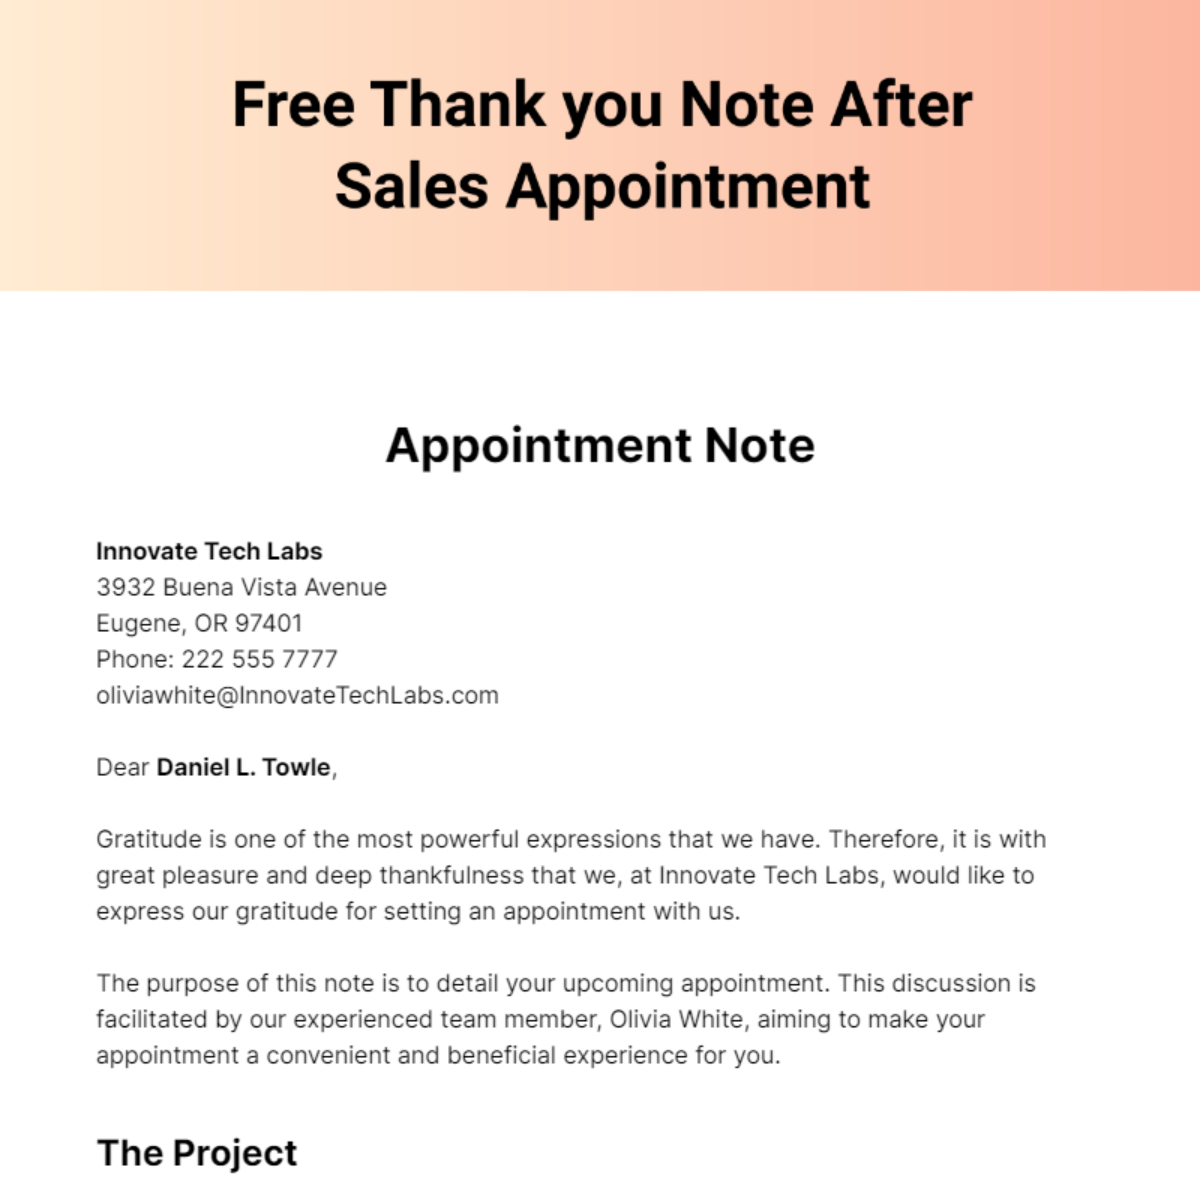 Thank you Note After Sales Appointment Template